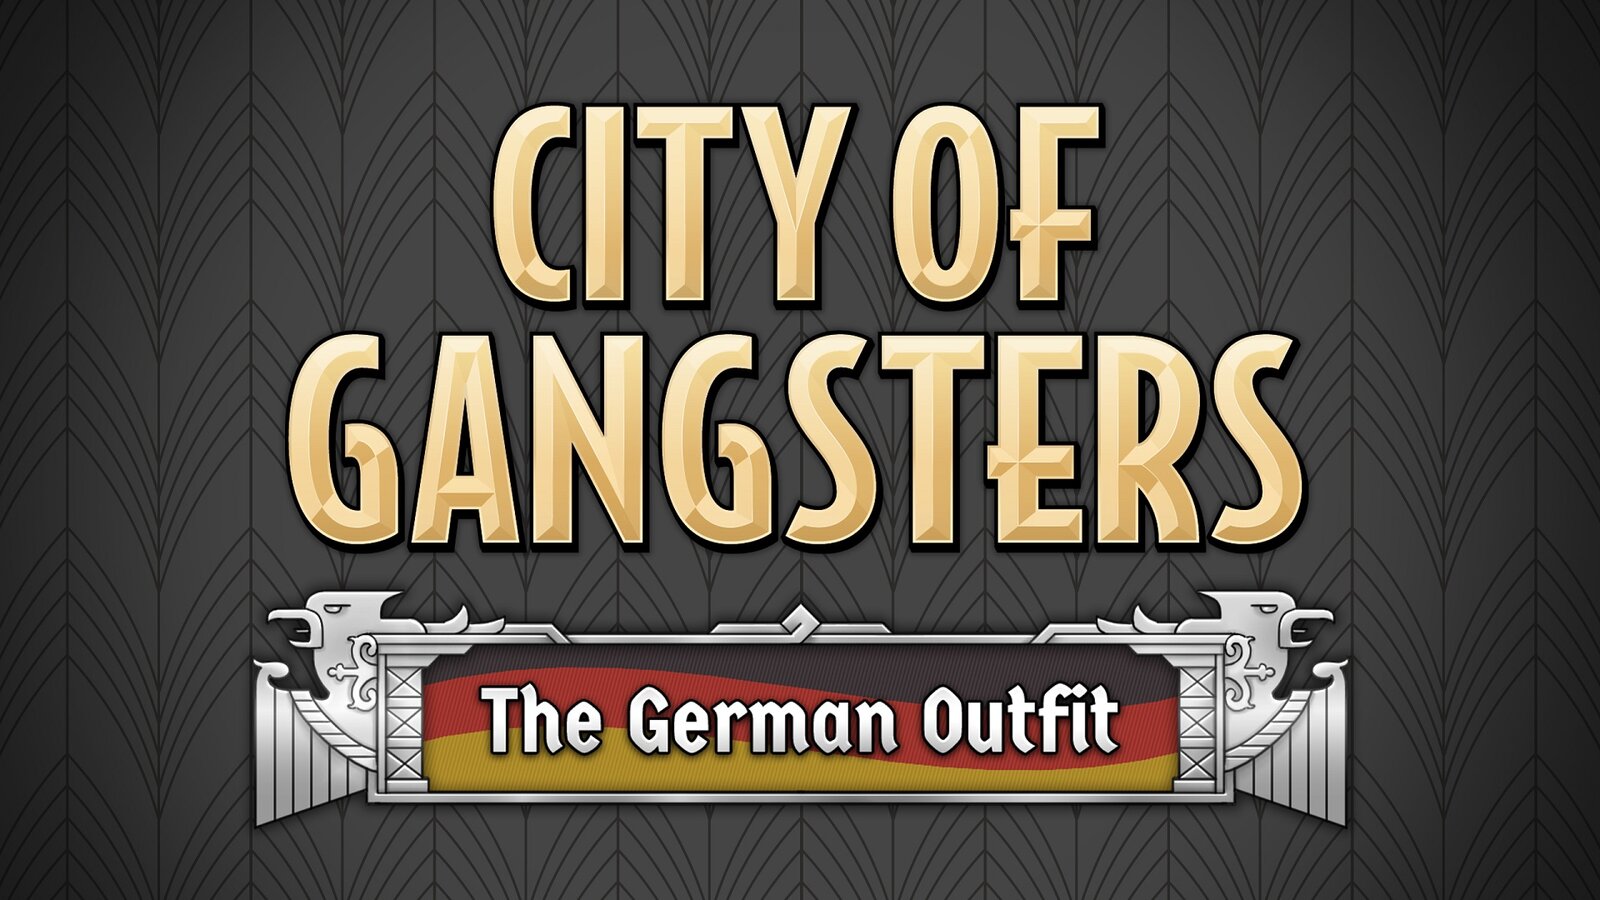 City of Gangsters: The German Outfit